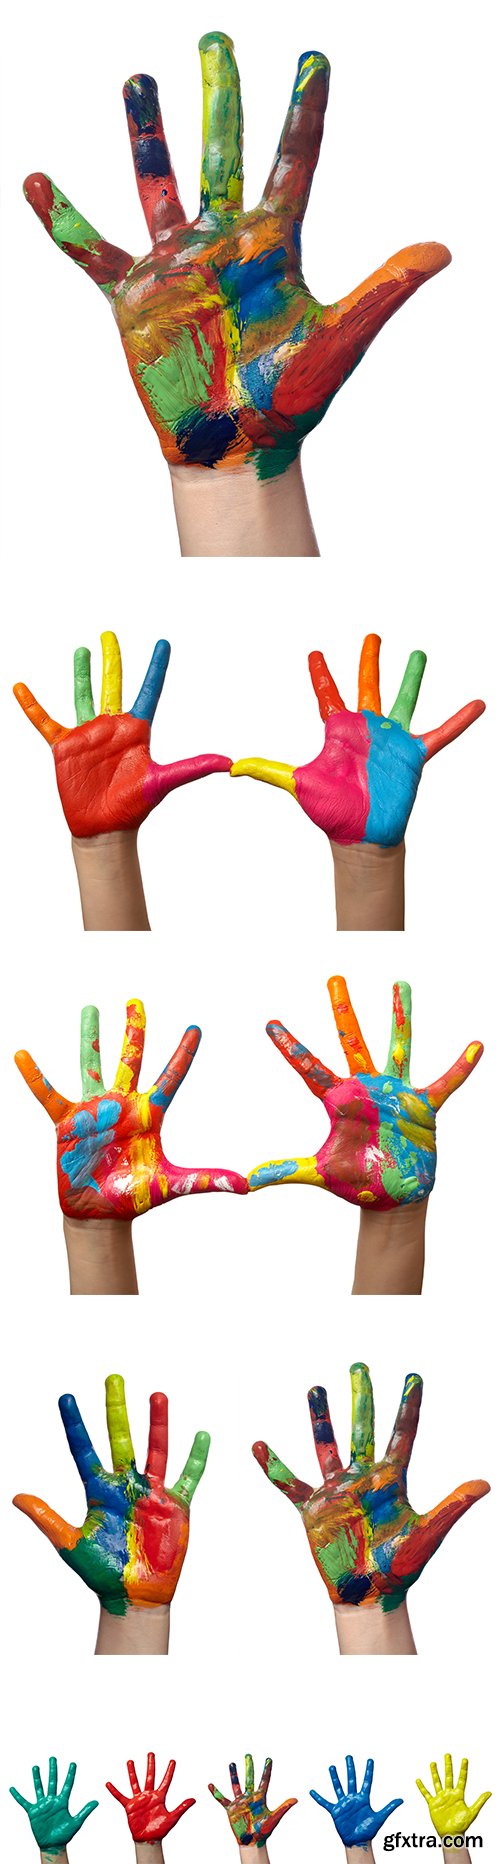 Colorful Child Hands-2 Isolated - 18xJPGs